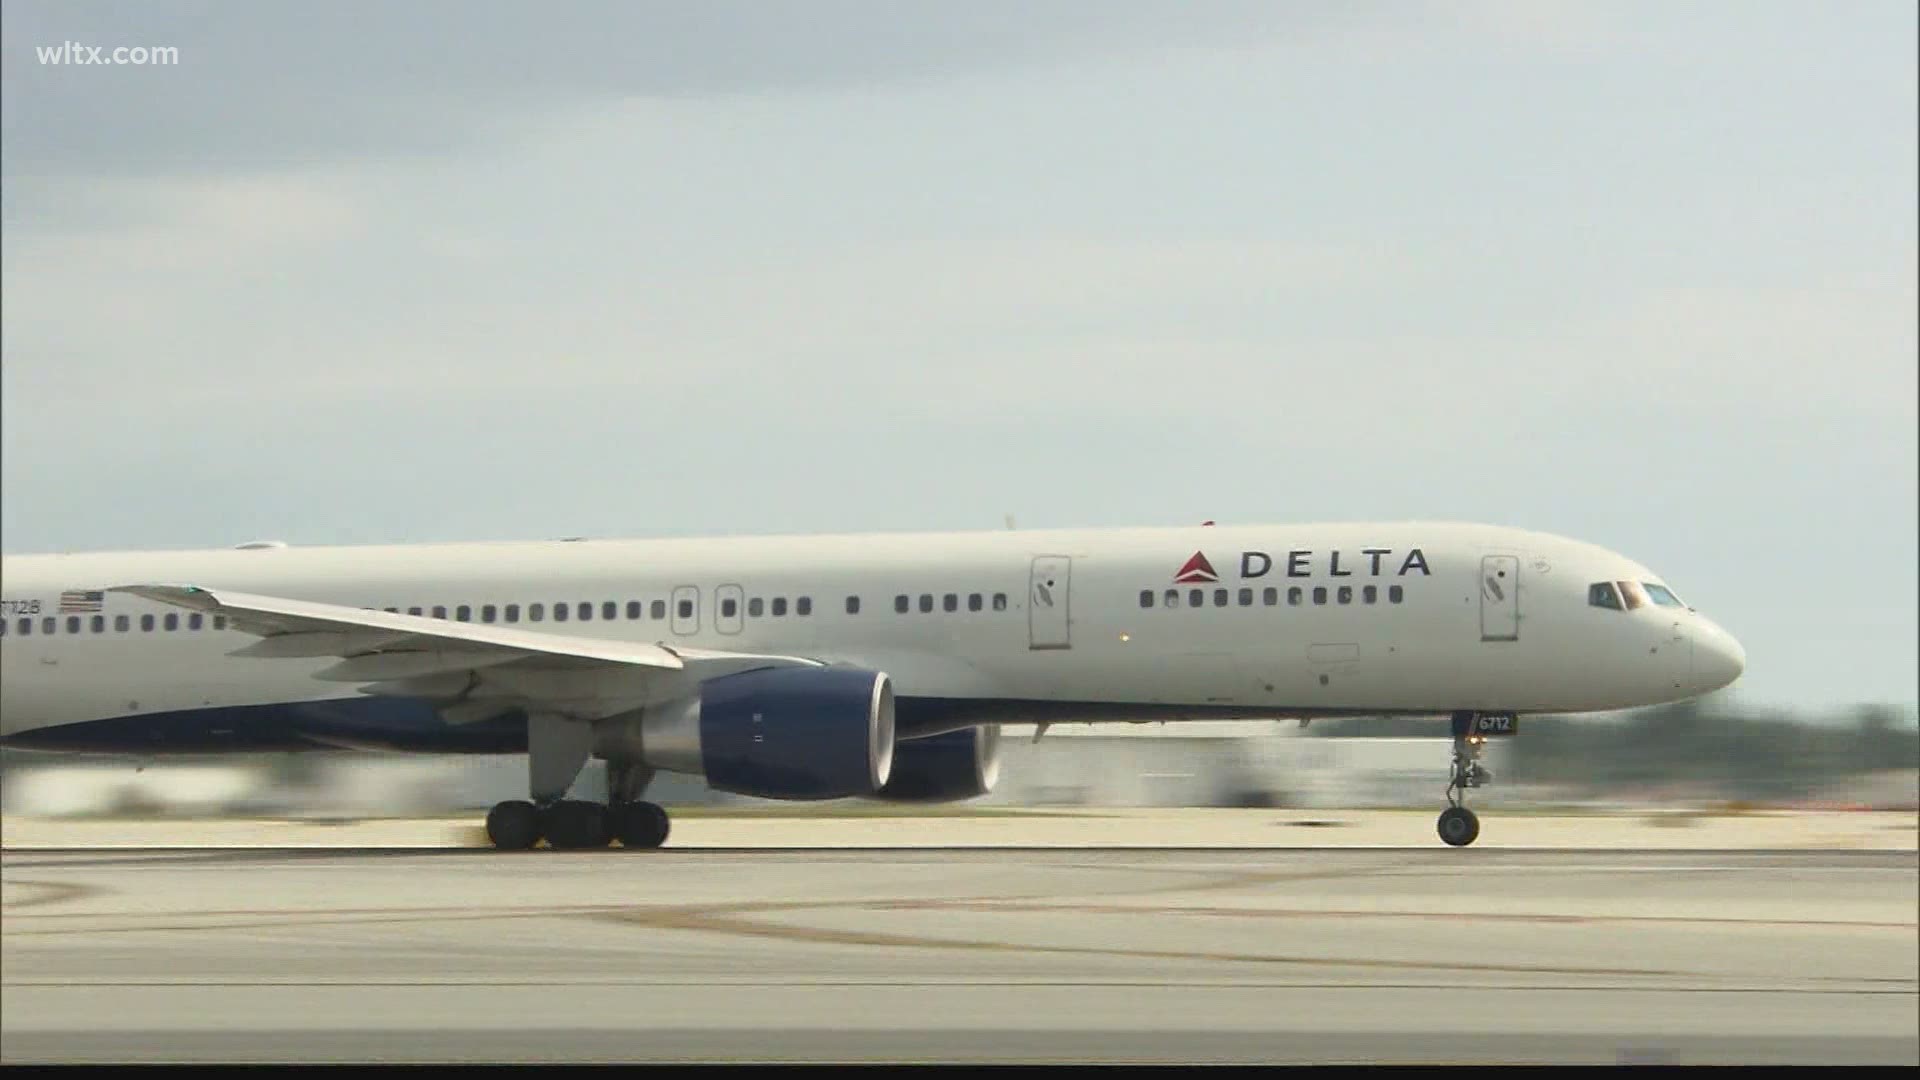 Delta Air Lines announced Wednesday it will stop blocking middle seats on its planes starting May 1, marking the last U.S. carrier to end the policy.